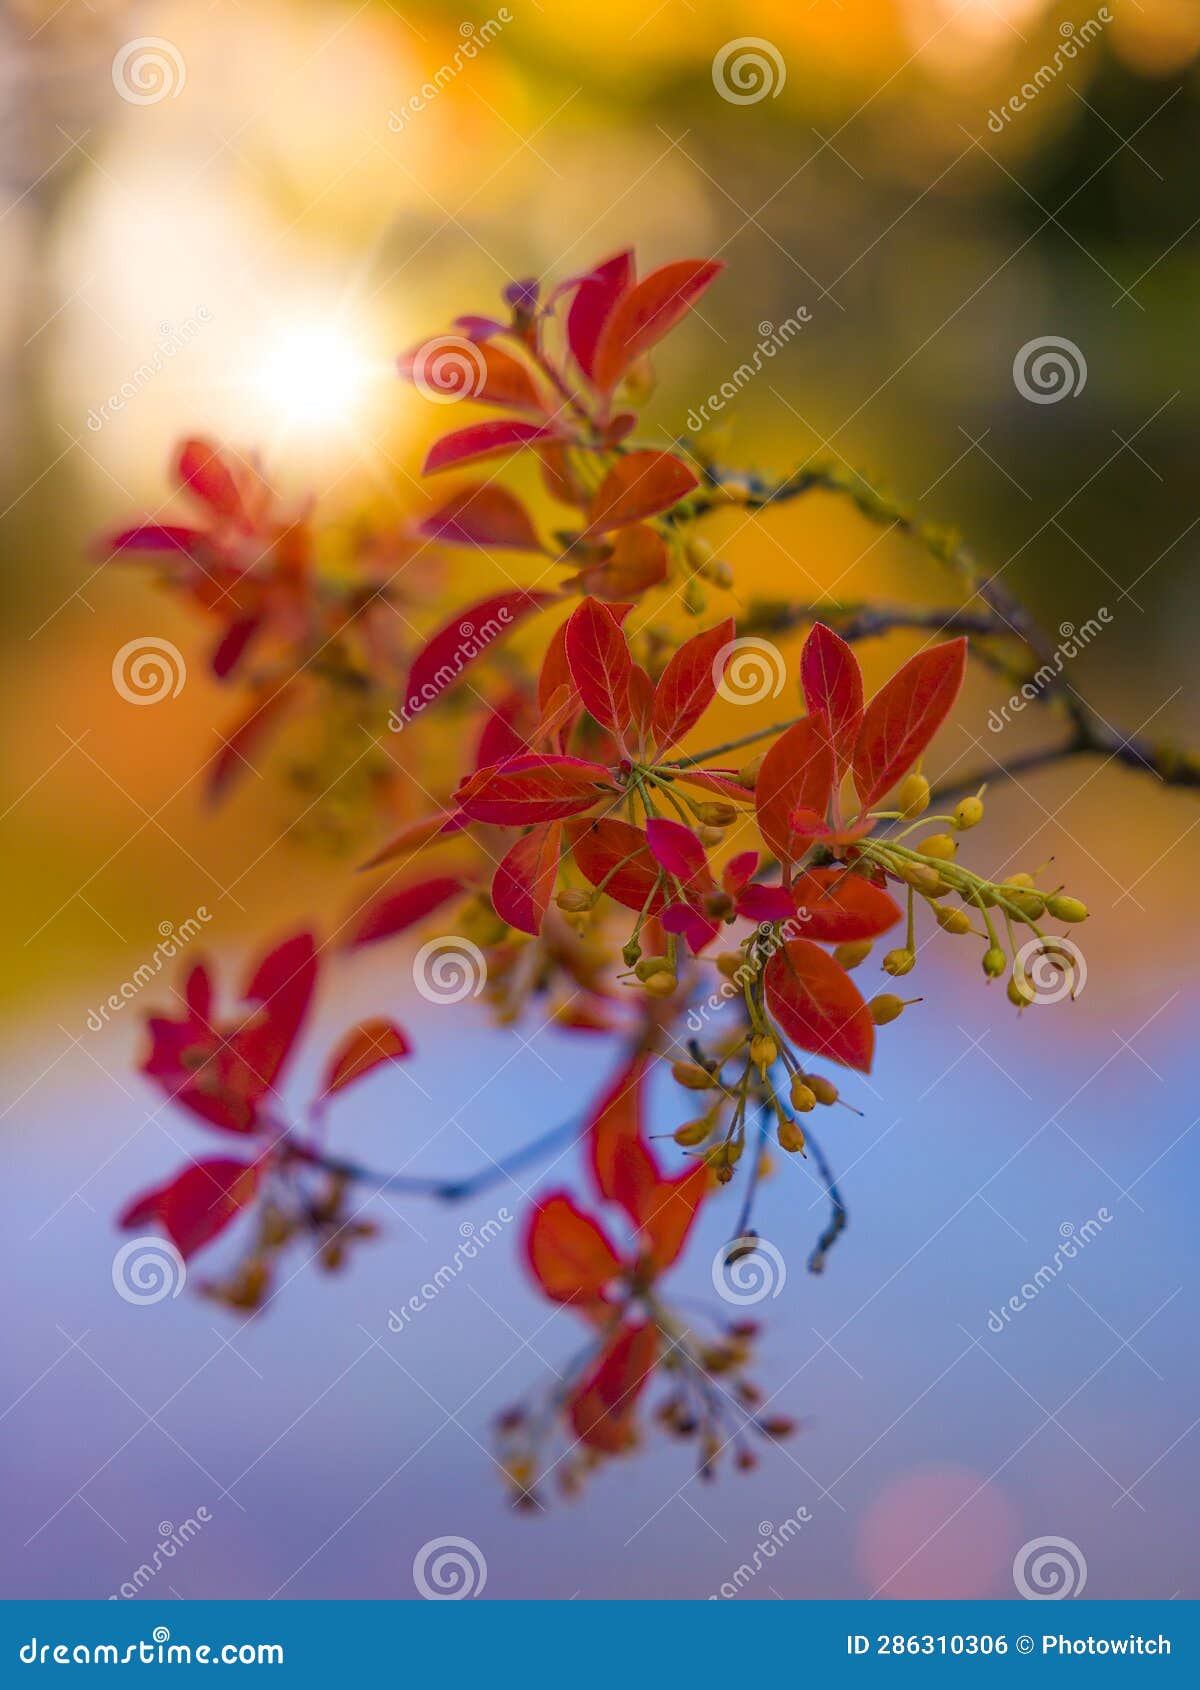 red leaves of japanese maple tree